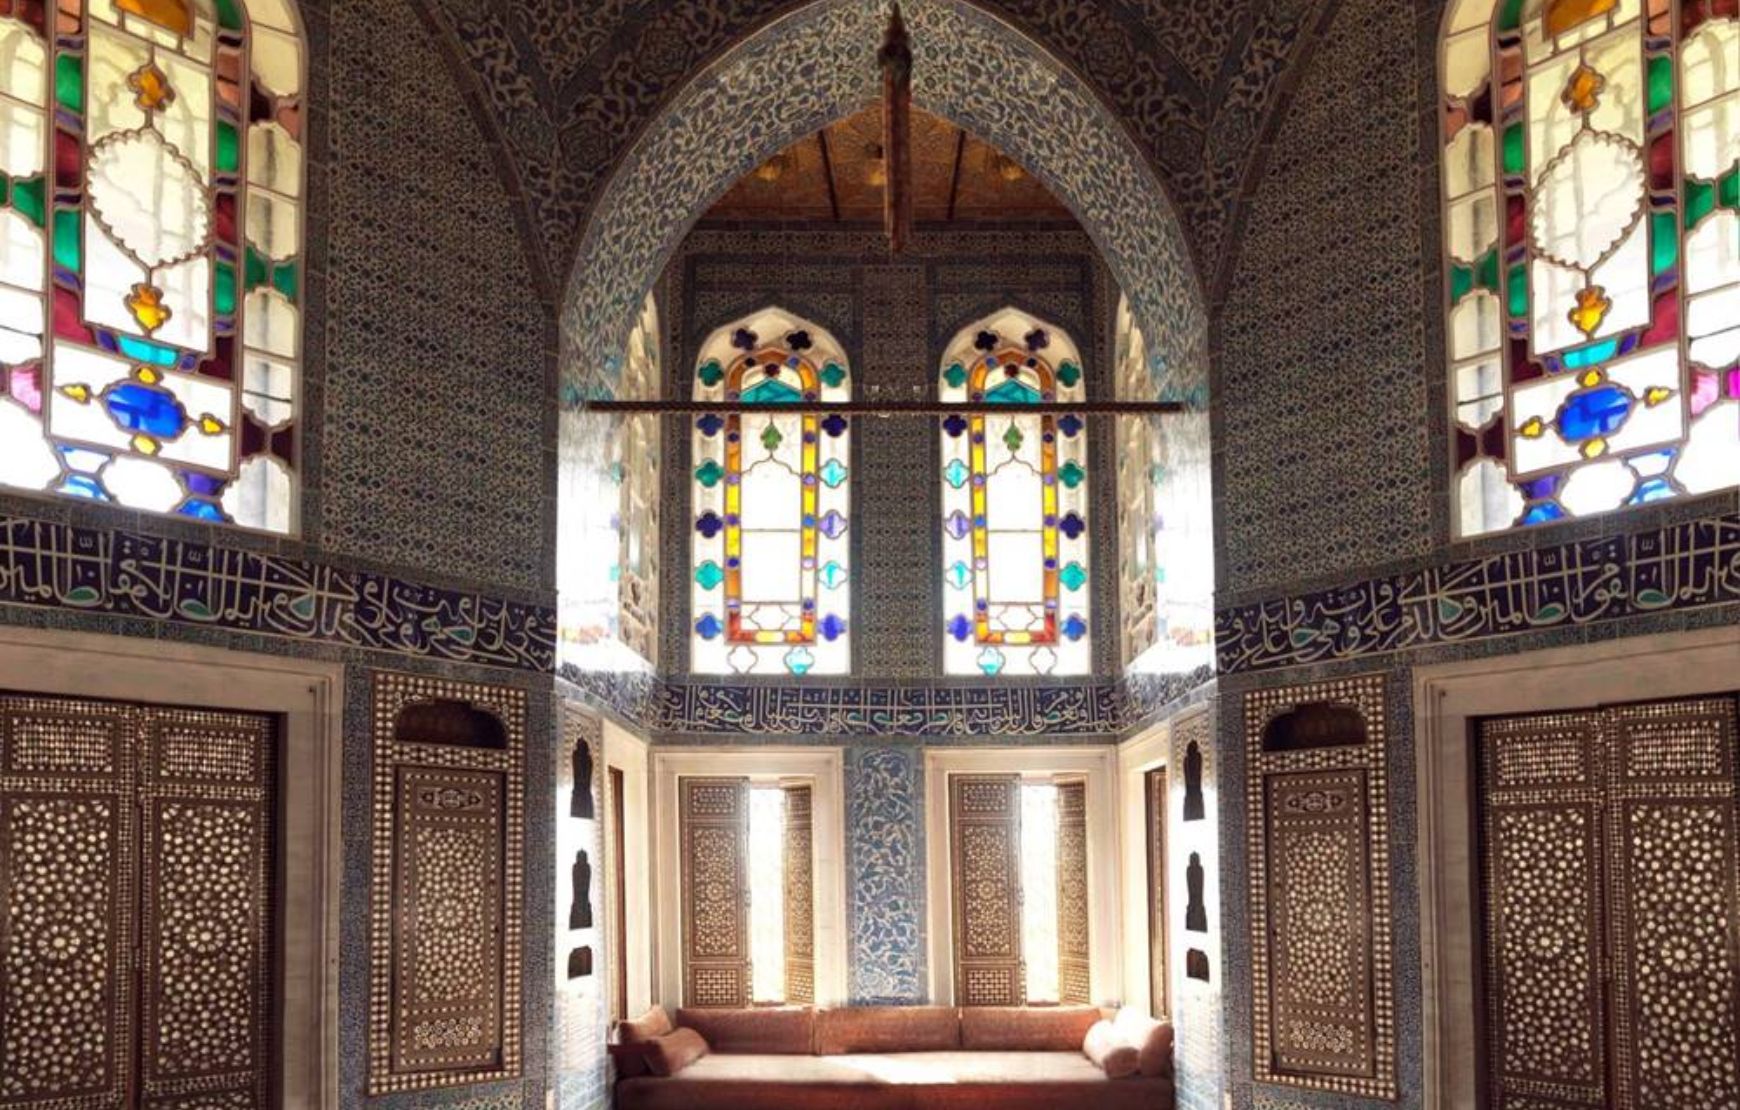 Inside of Topkapi Palace at our Ottomon Relics Tour